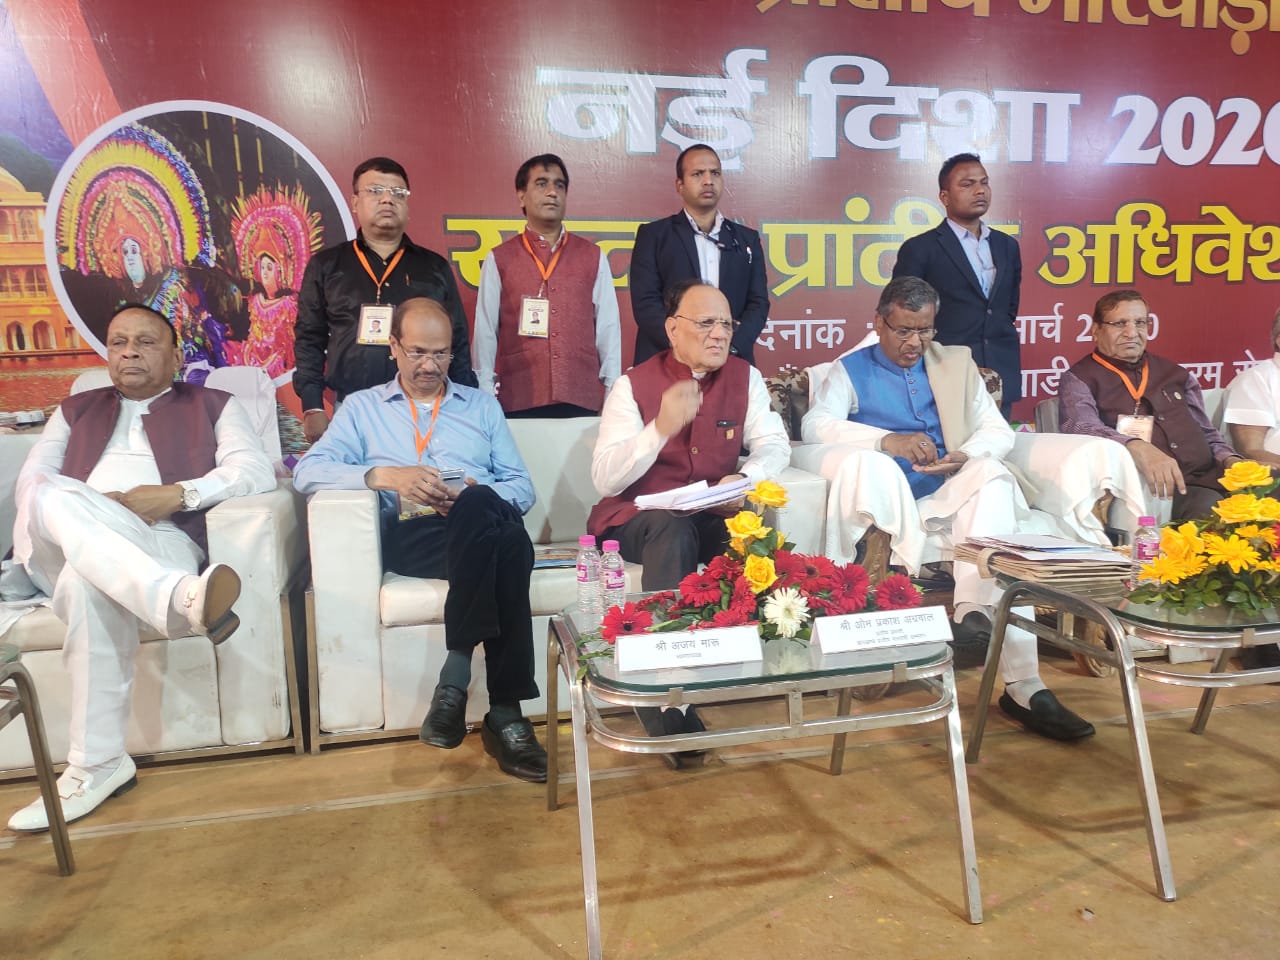 Second day of two days conference of seventh Jharkhand state level marwari conference